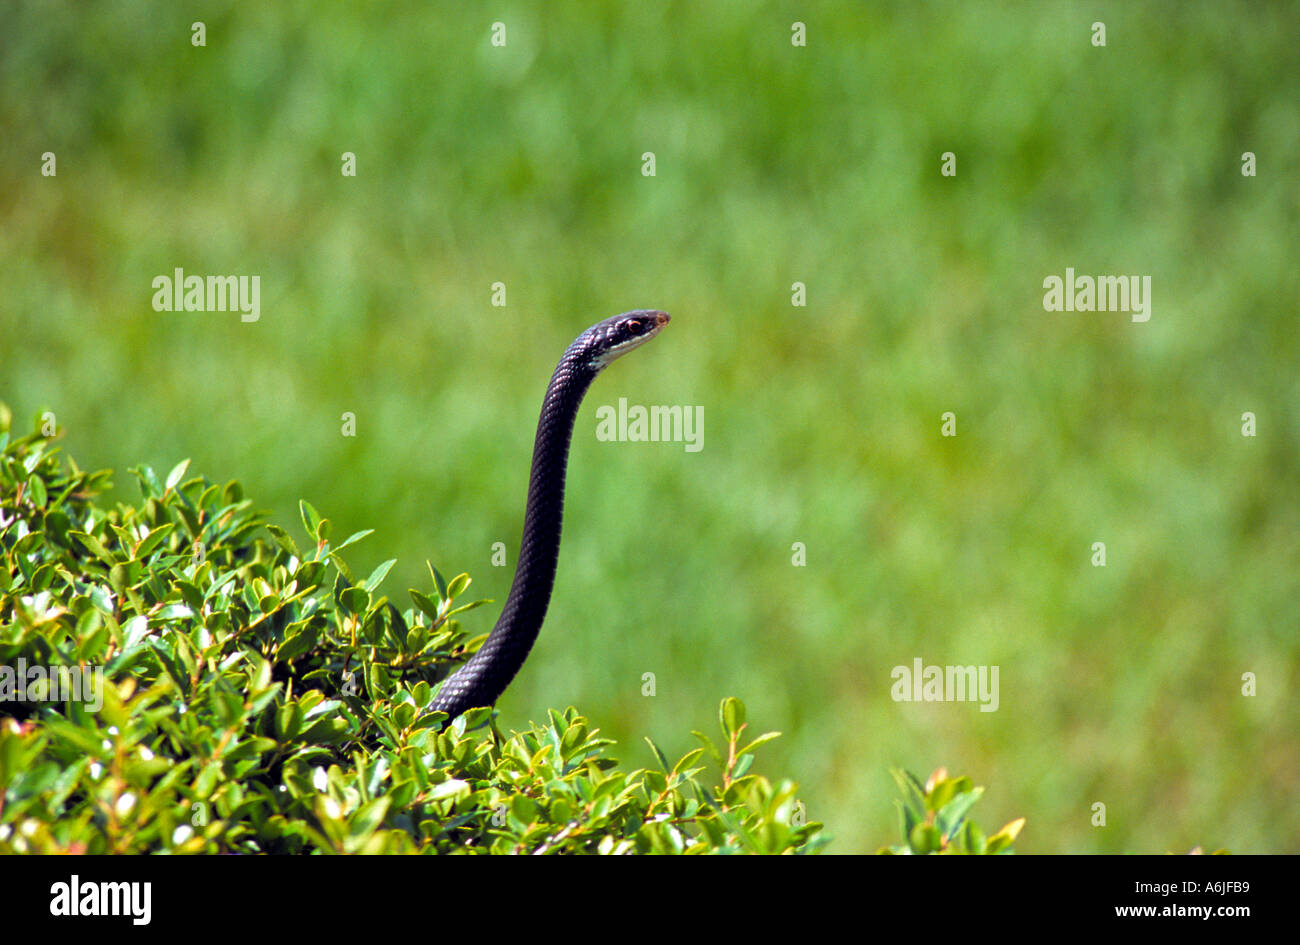 Florida black racer snake - Coluber constrictor priapus - peeking above a hedge in the sun Stock Photo